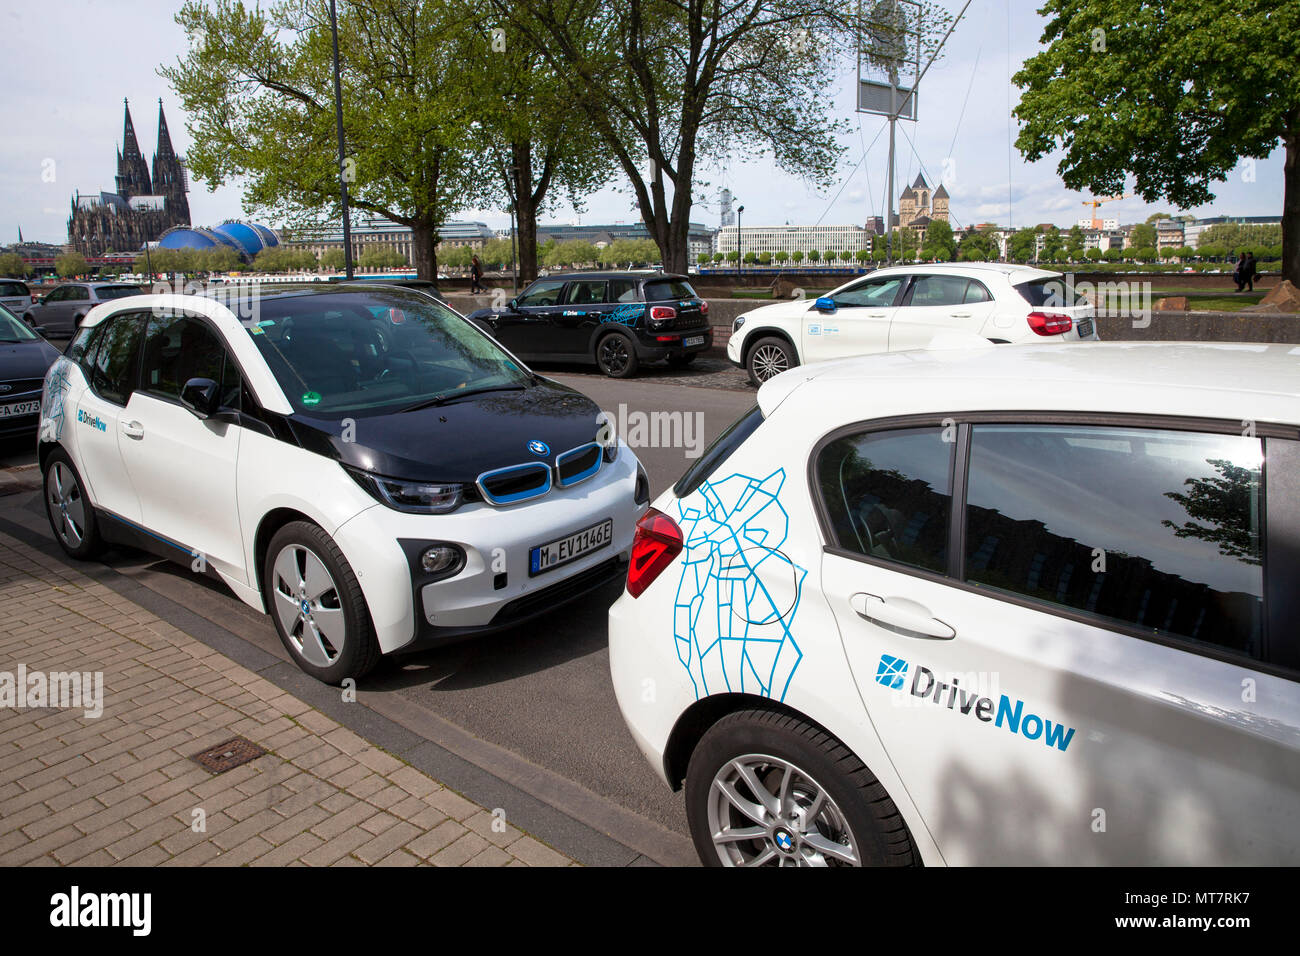 cars of the carsharing companies Drive Now and Car2Go in the district Deutz, Cologne, Germany Stock Photo